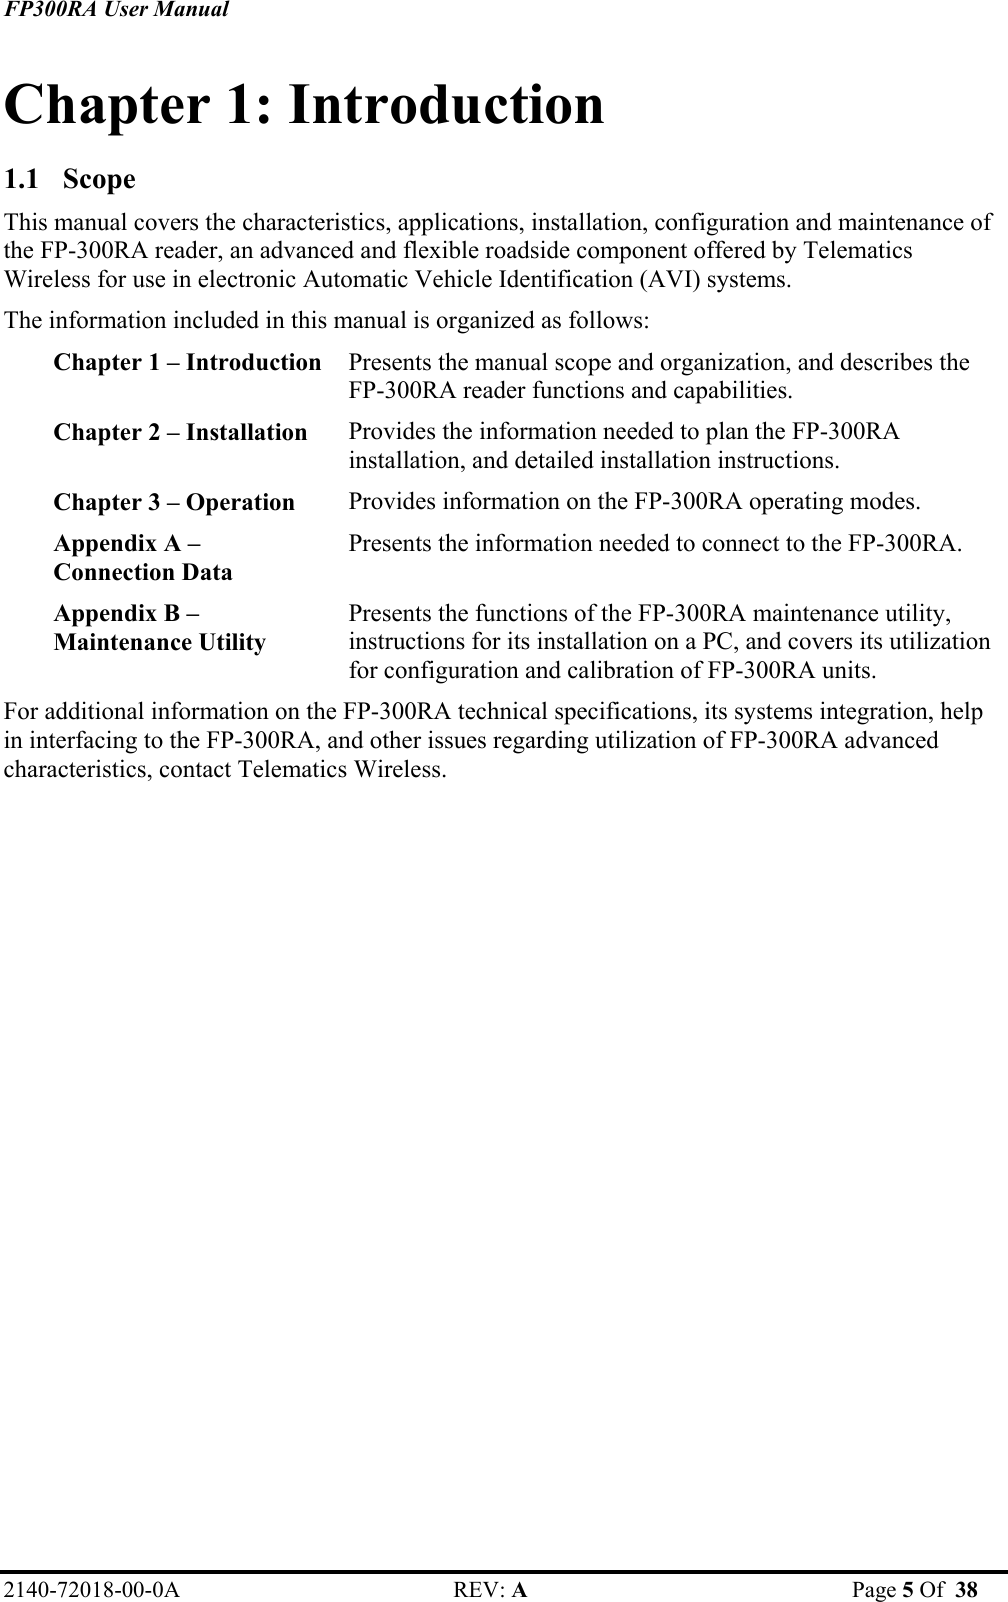 FP300RA User Manual 2140-72018-00-0A REV: A  Page 5 Of  38  Chapter 1: Introduction 1.1 Scope This manual covers the characteristics, applications, installation, configuration and maintenance of the FP-300RA reader, an advanced and flexible roadside component offered by Telematics Wireless for use in electronic Automatic Vehicle Identification (AVI) systems.  The information included in this manual is organized as follows: Presents the manual scope and organization, and describes the  FP-300RA reader functions and capabilities.  Chapter 1 – Introduction Provides the information needed to plan the FP-300RA installation, and detailed installation instructions. Chapter 2 – Installation  Provides information on the FP-300RA operating modes. Chapter 3 – Operation  Presents the information needed to connect to the FP-300RA. Appendix A –  Connection Data Presents the functions of the FP-300RA maintenance utility, instructions for its installation on a PC, and covers its utilization for configuration and calibration of FP-300RA units. Appendix B –  Maintenance Utility For additional information on the FP-300RA technical specifications, its systems integration, help in interfacing to the FP-300RA, and other issues regarding utilization of FP-300RA advanced characteristics, contact Telematics Wireless. 